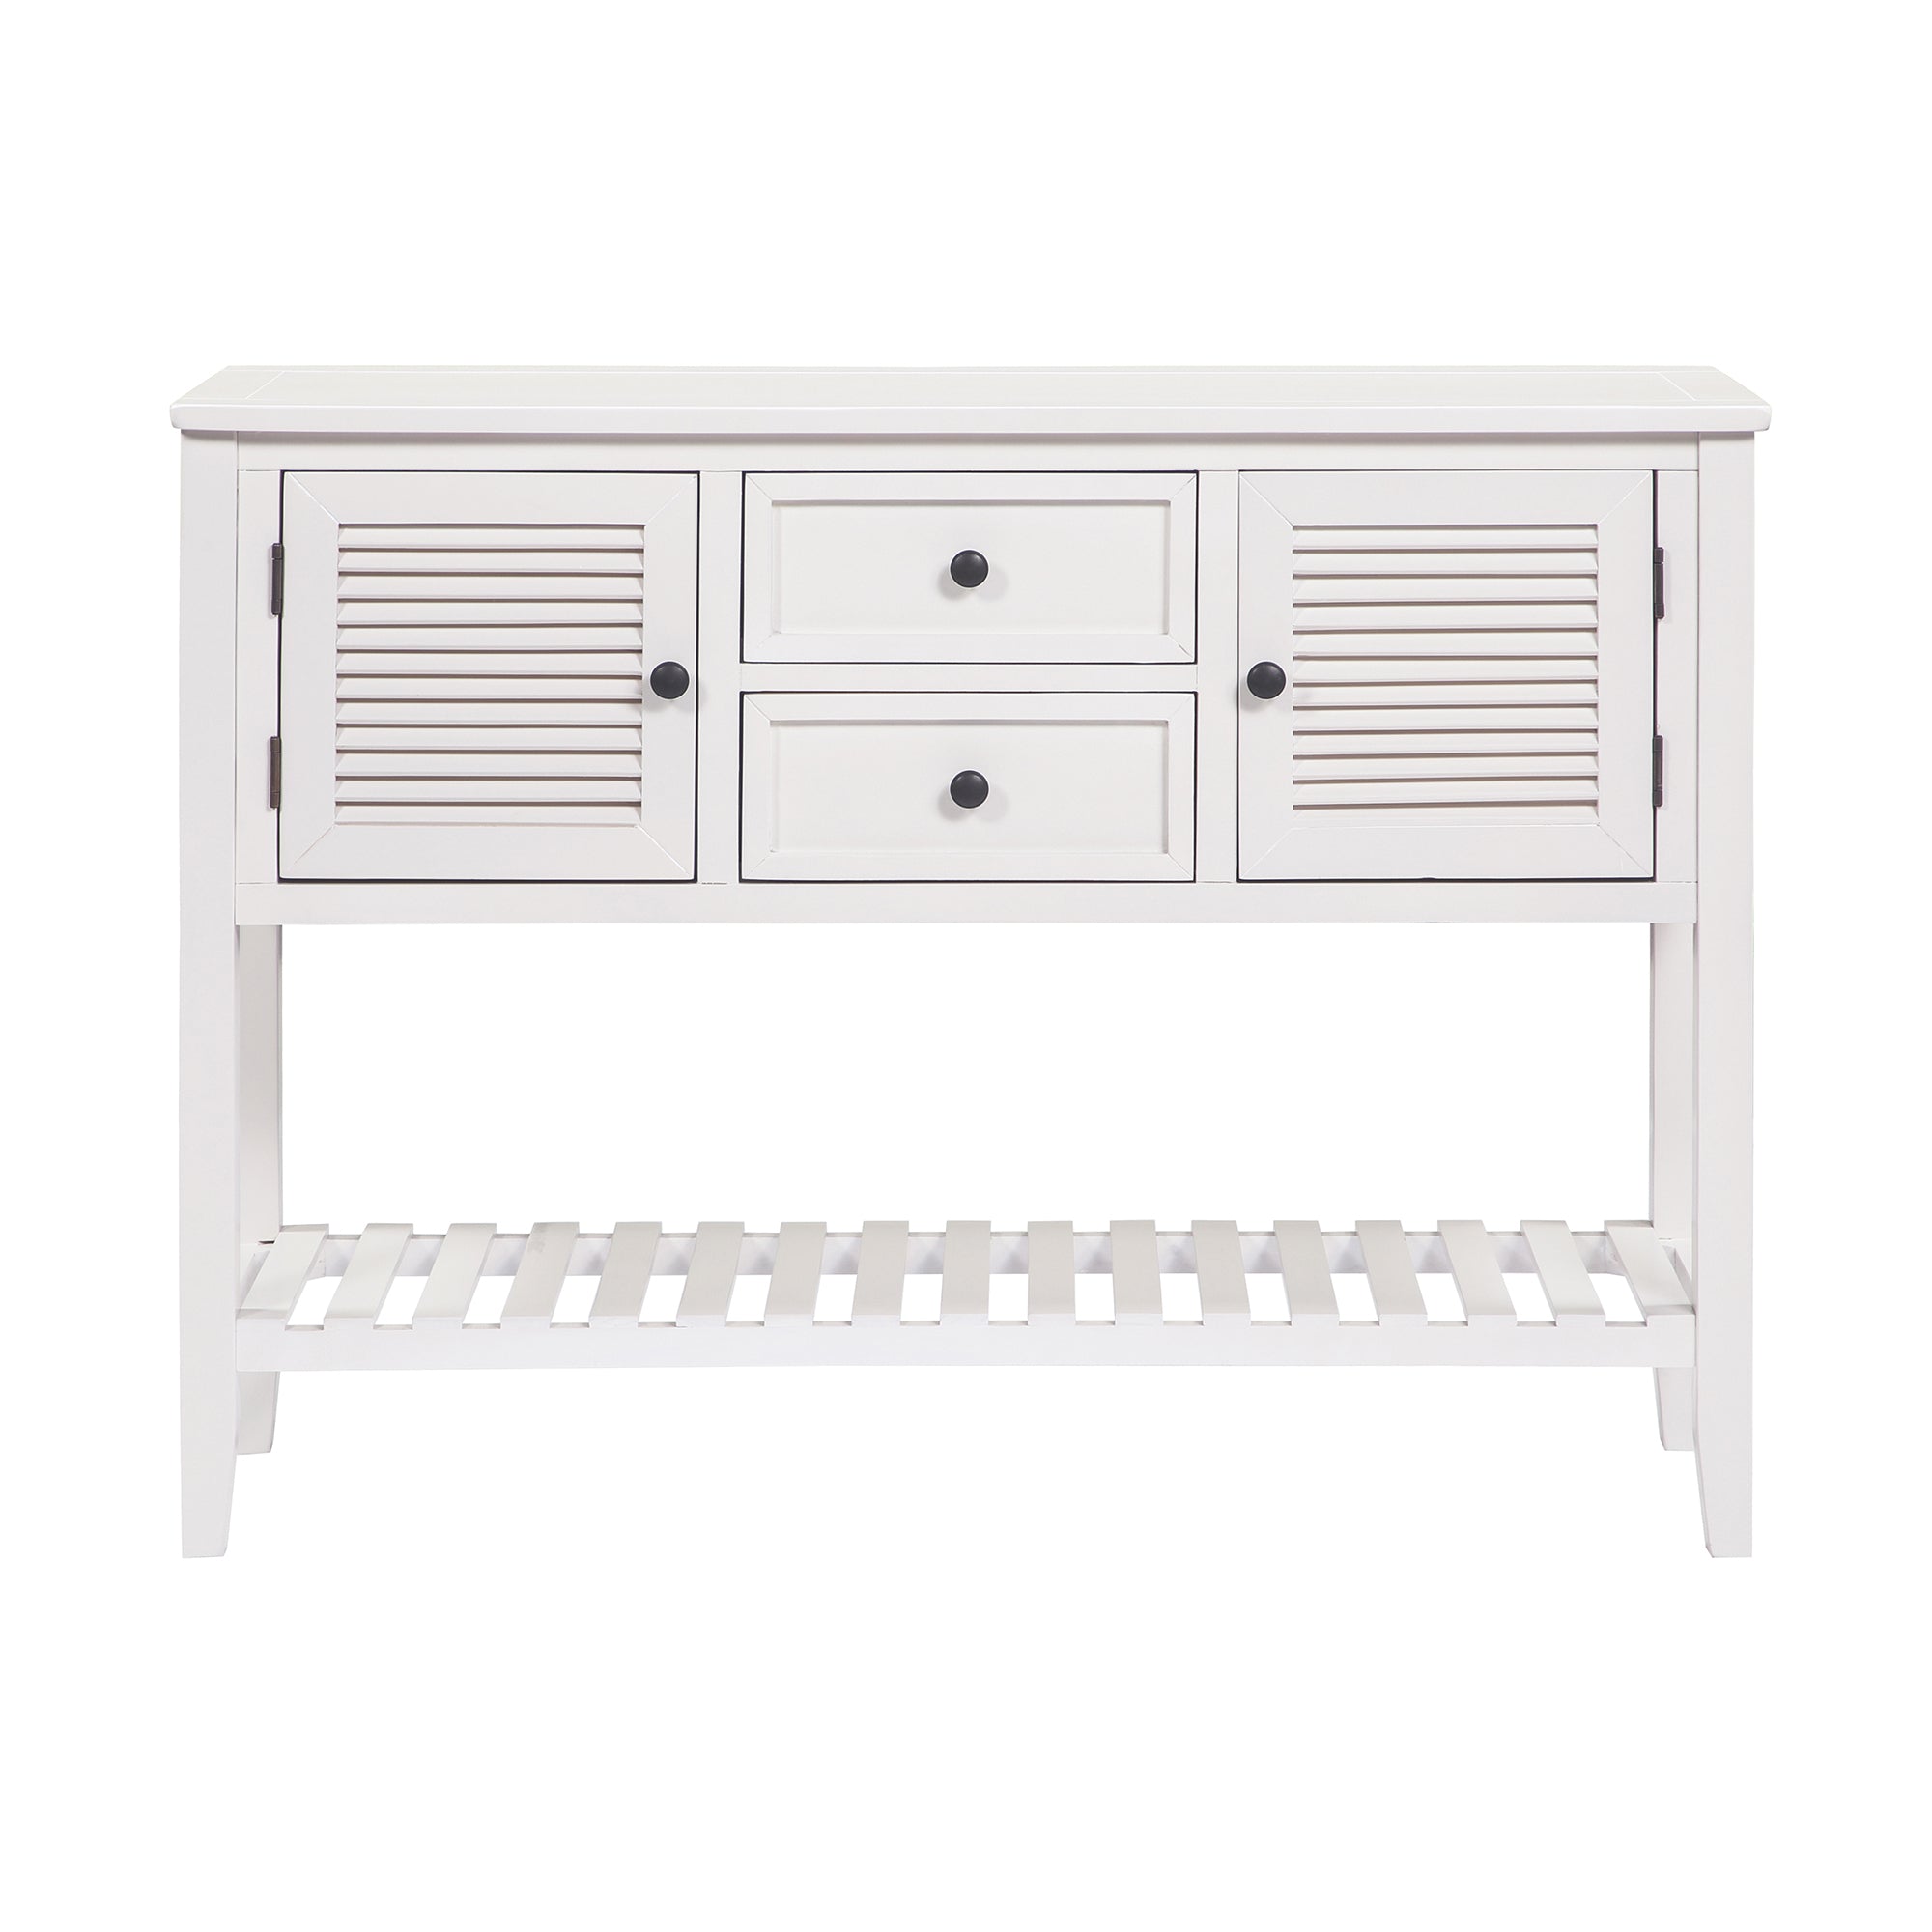 Retro Console Table Sideboard with Shutter doors, Two Storage Drawers and Bottom Shelf (White)-Boyel Living